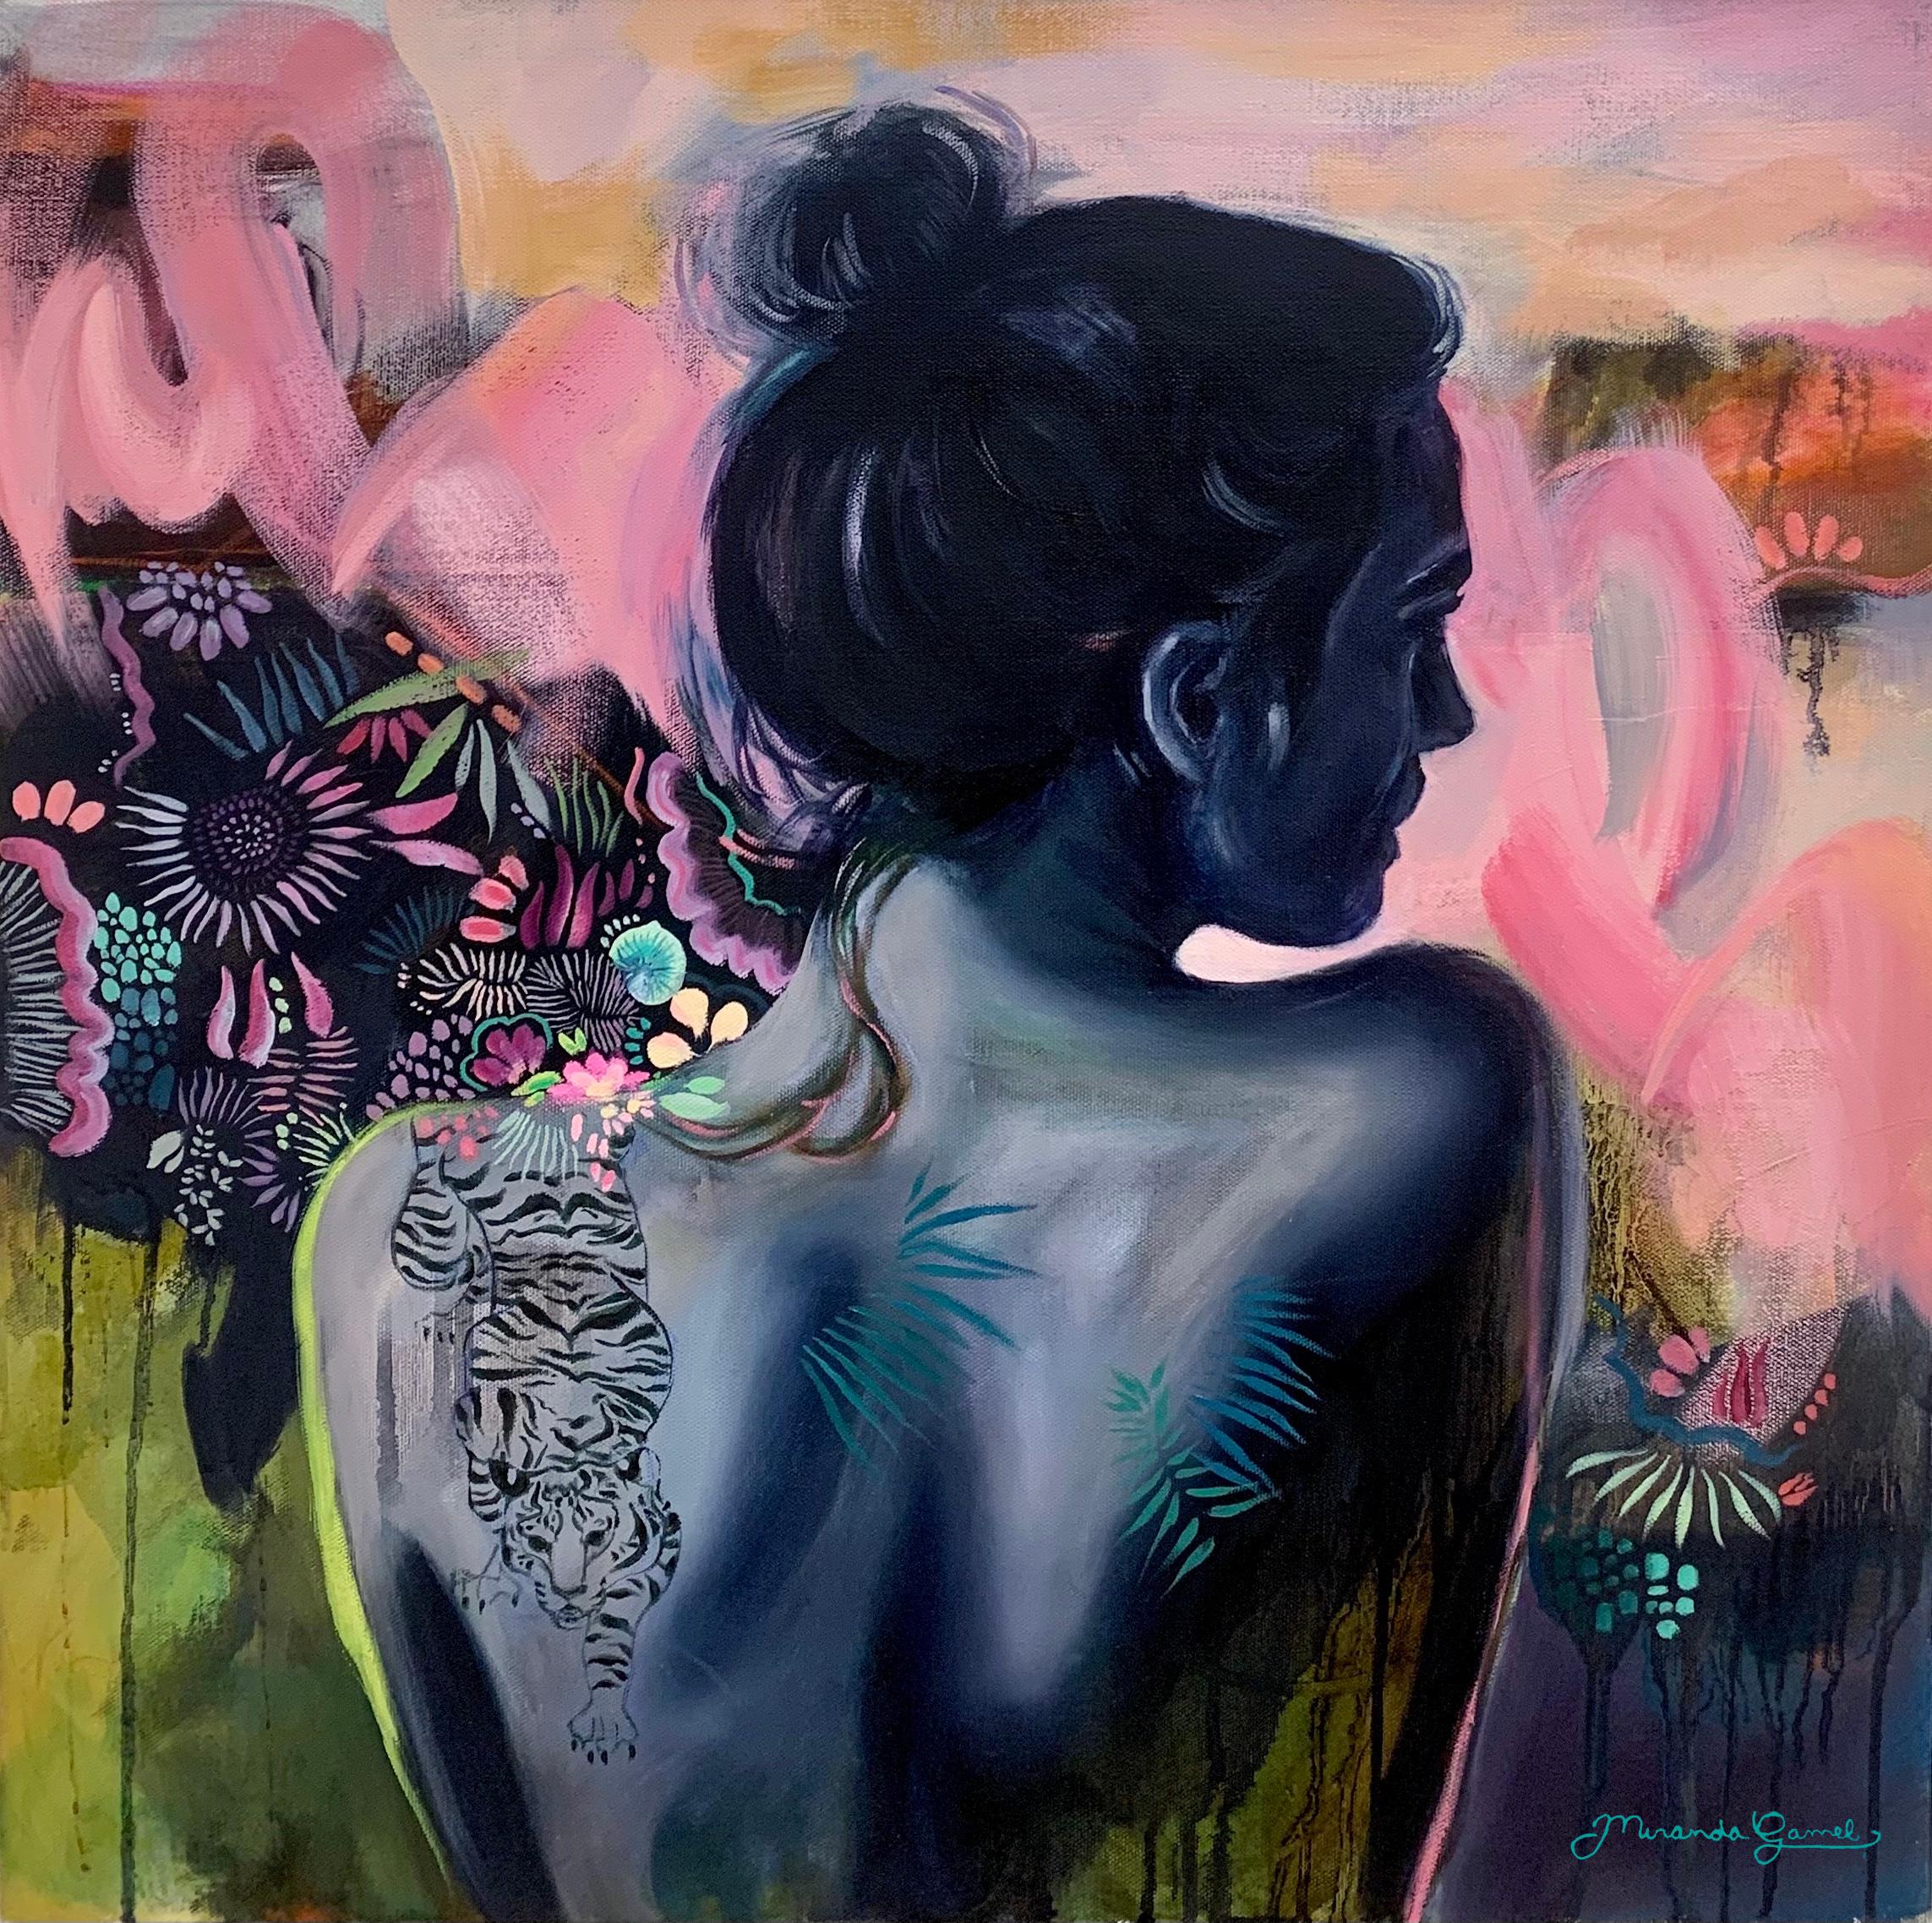 Miranda Gamel Figurative Painting - Transformation Knows No Bounds, Oil Painting